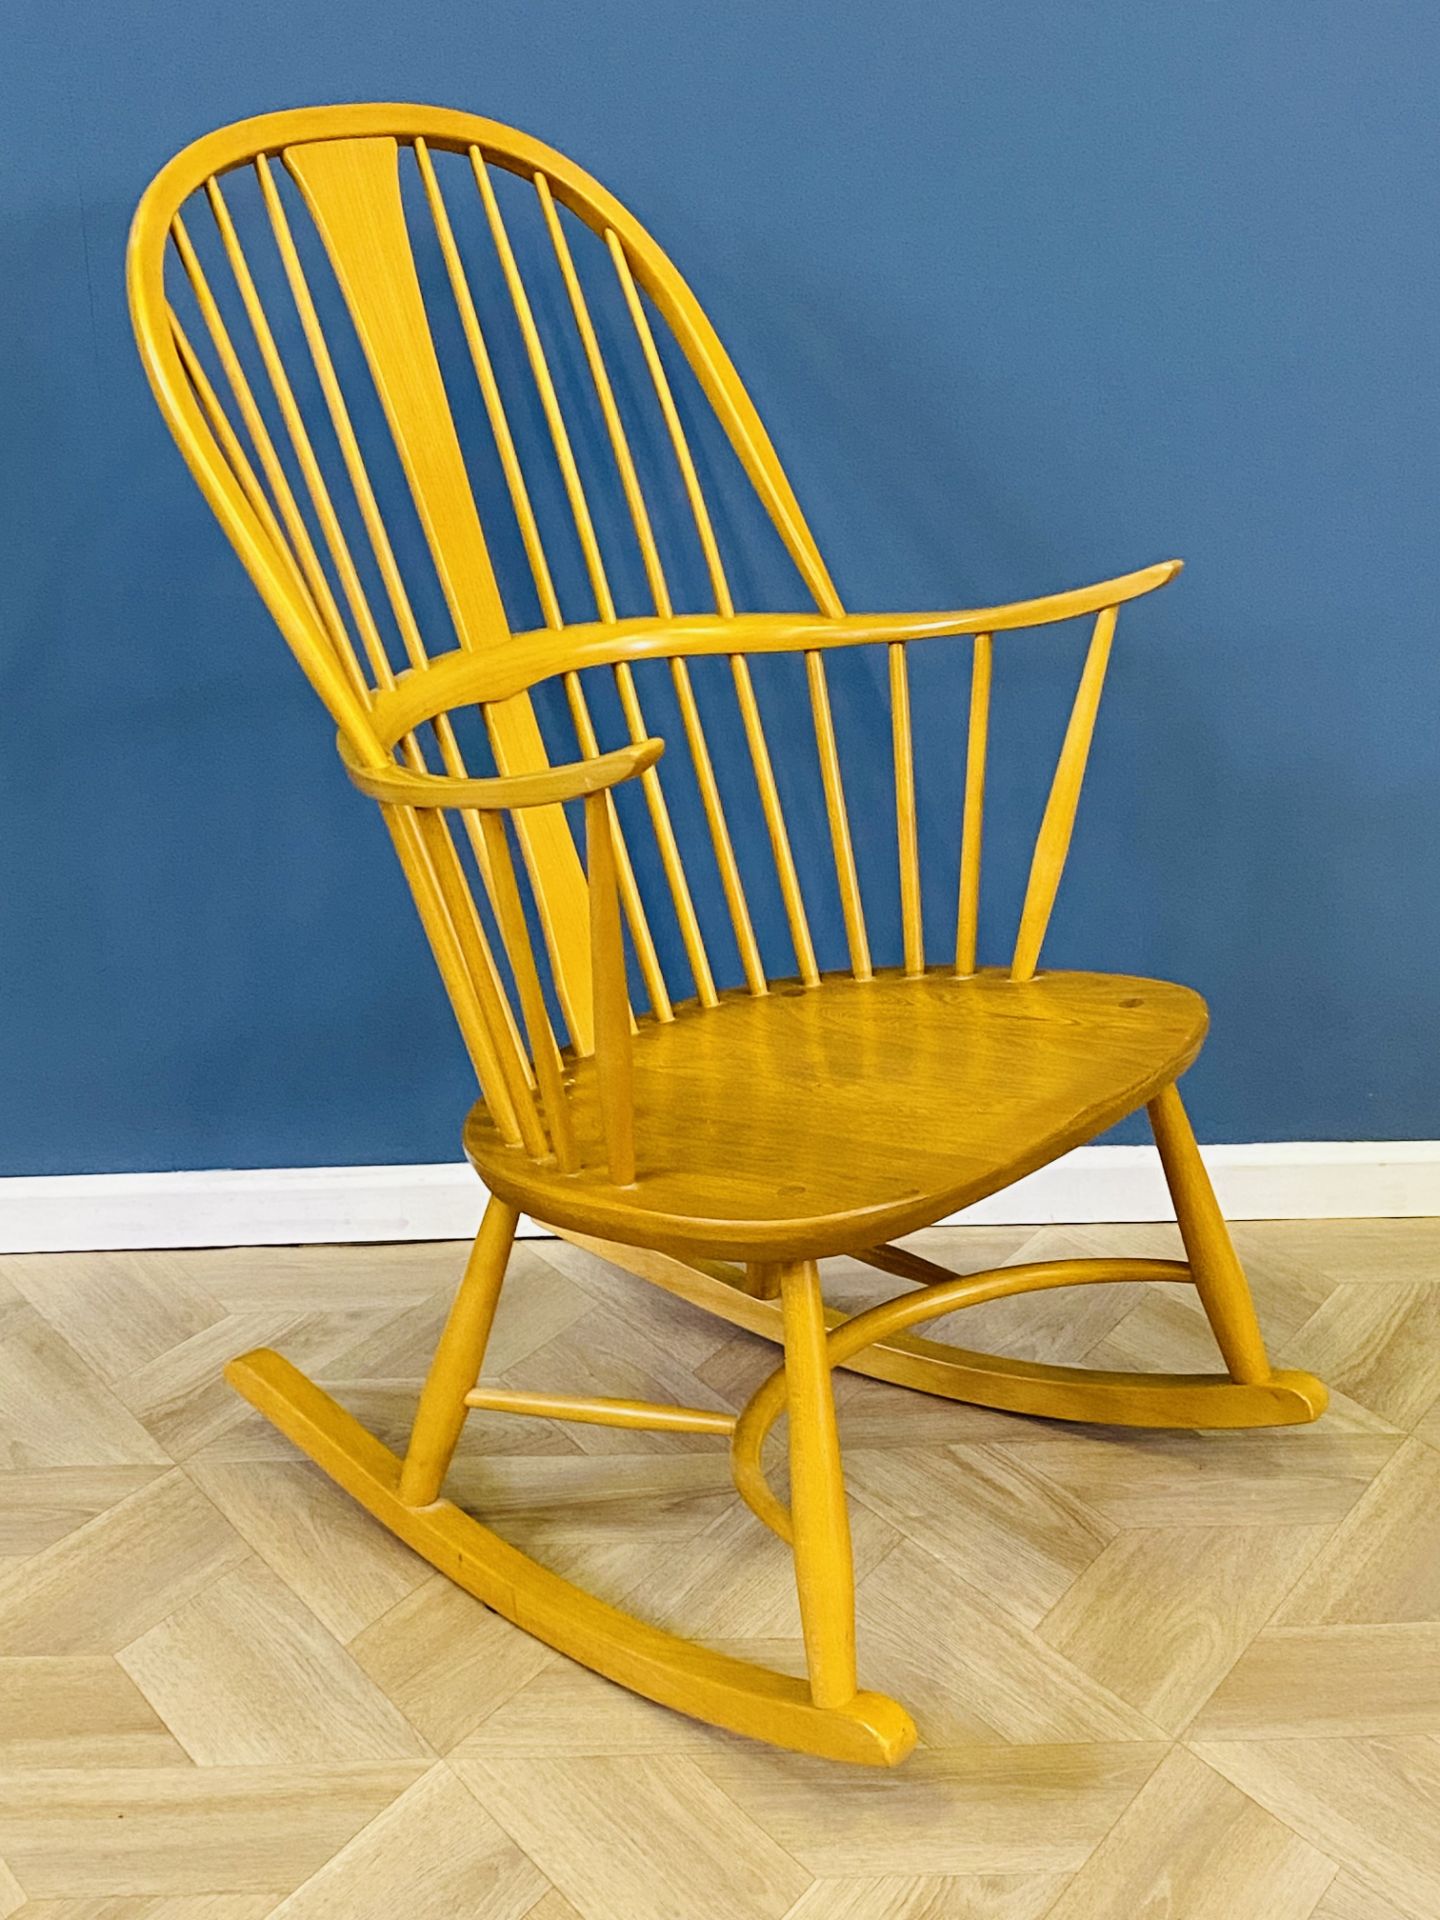 Ercol stick back rocking chair - Image 7 of 7